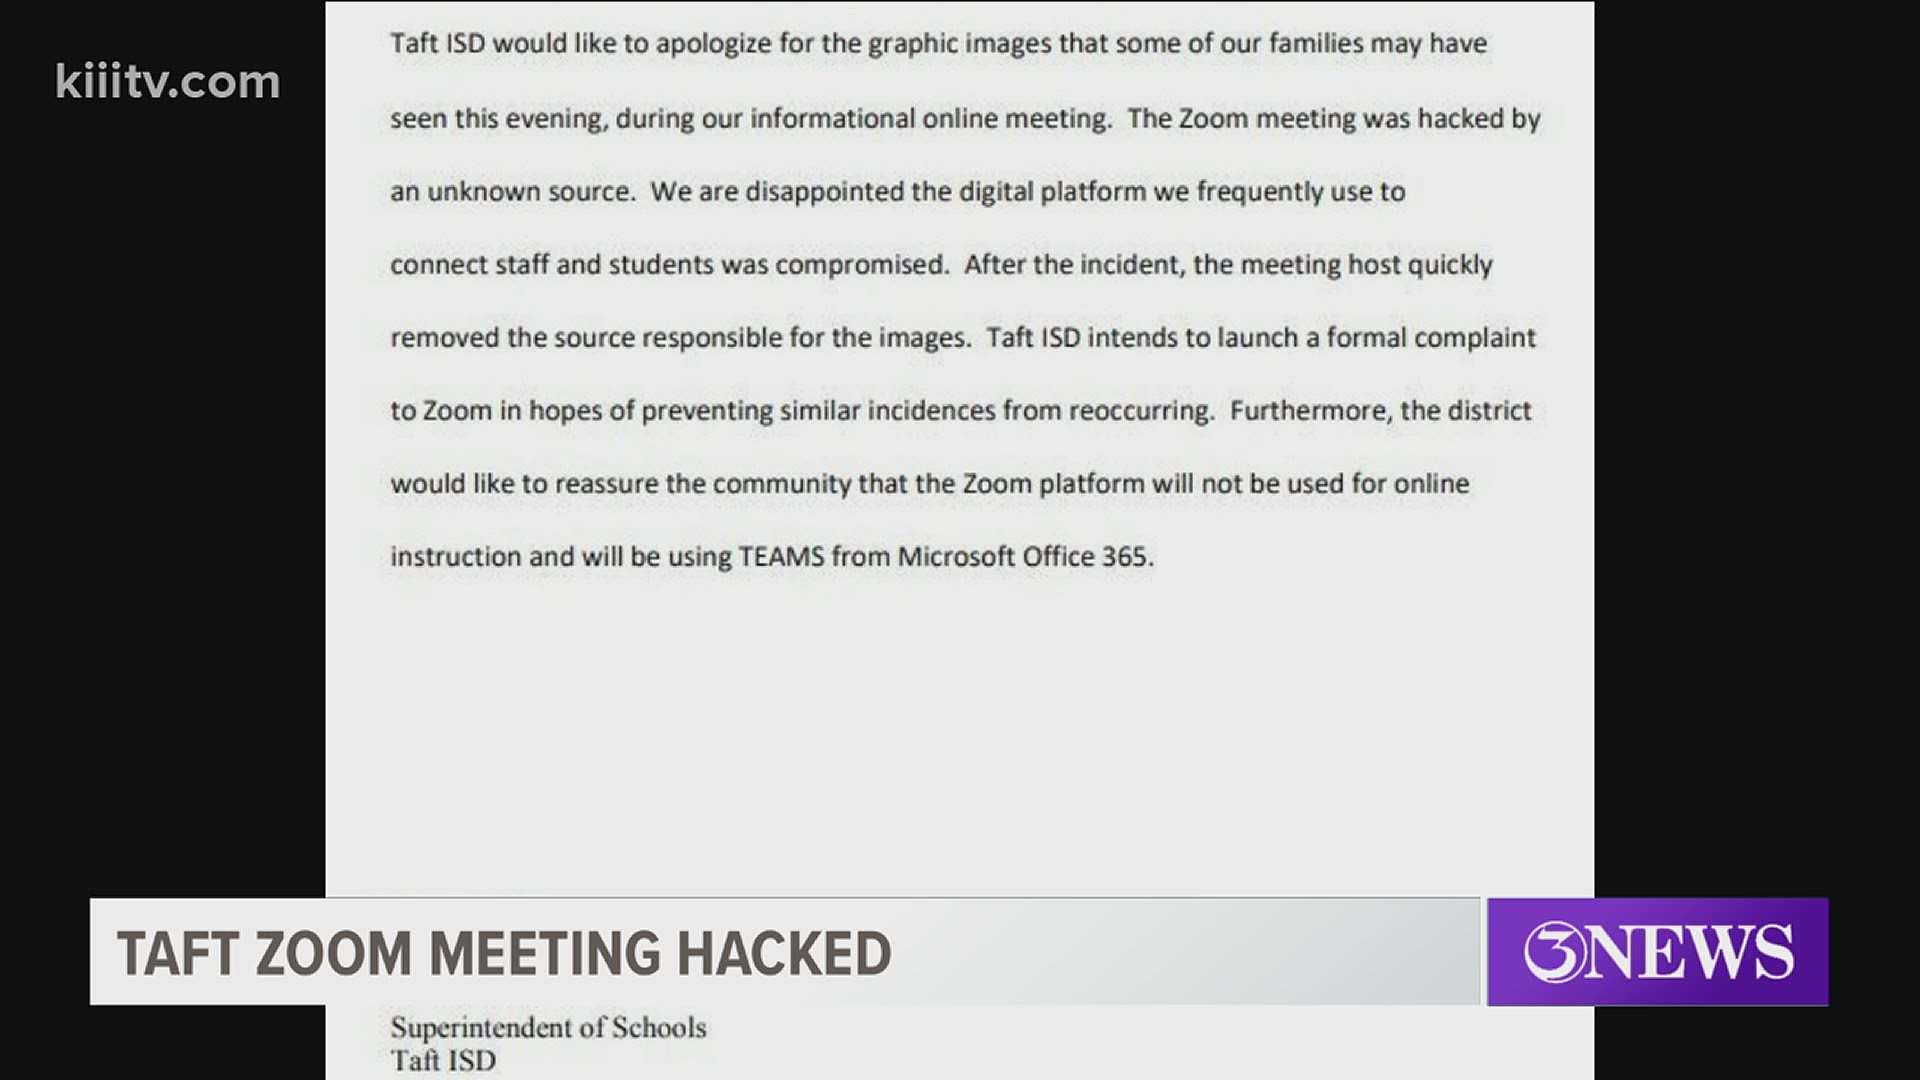 According to a letter from TAFT ISD Superintendent Ricardo Trevino, the meeting was hacked by an unknown source.